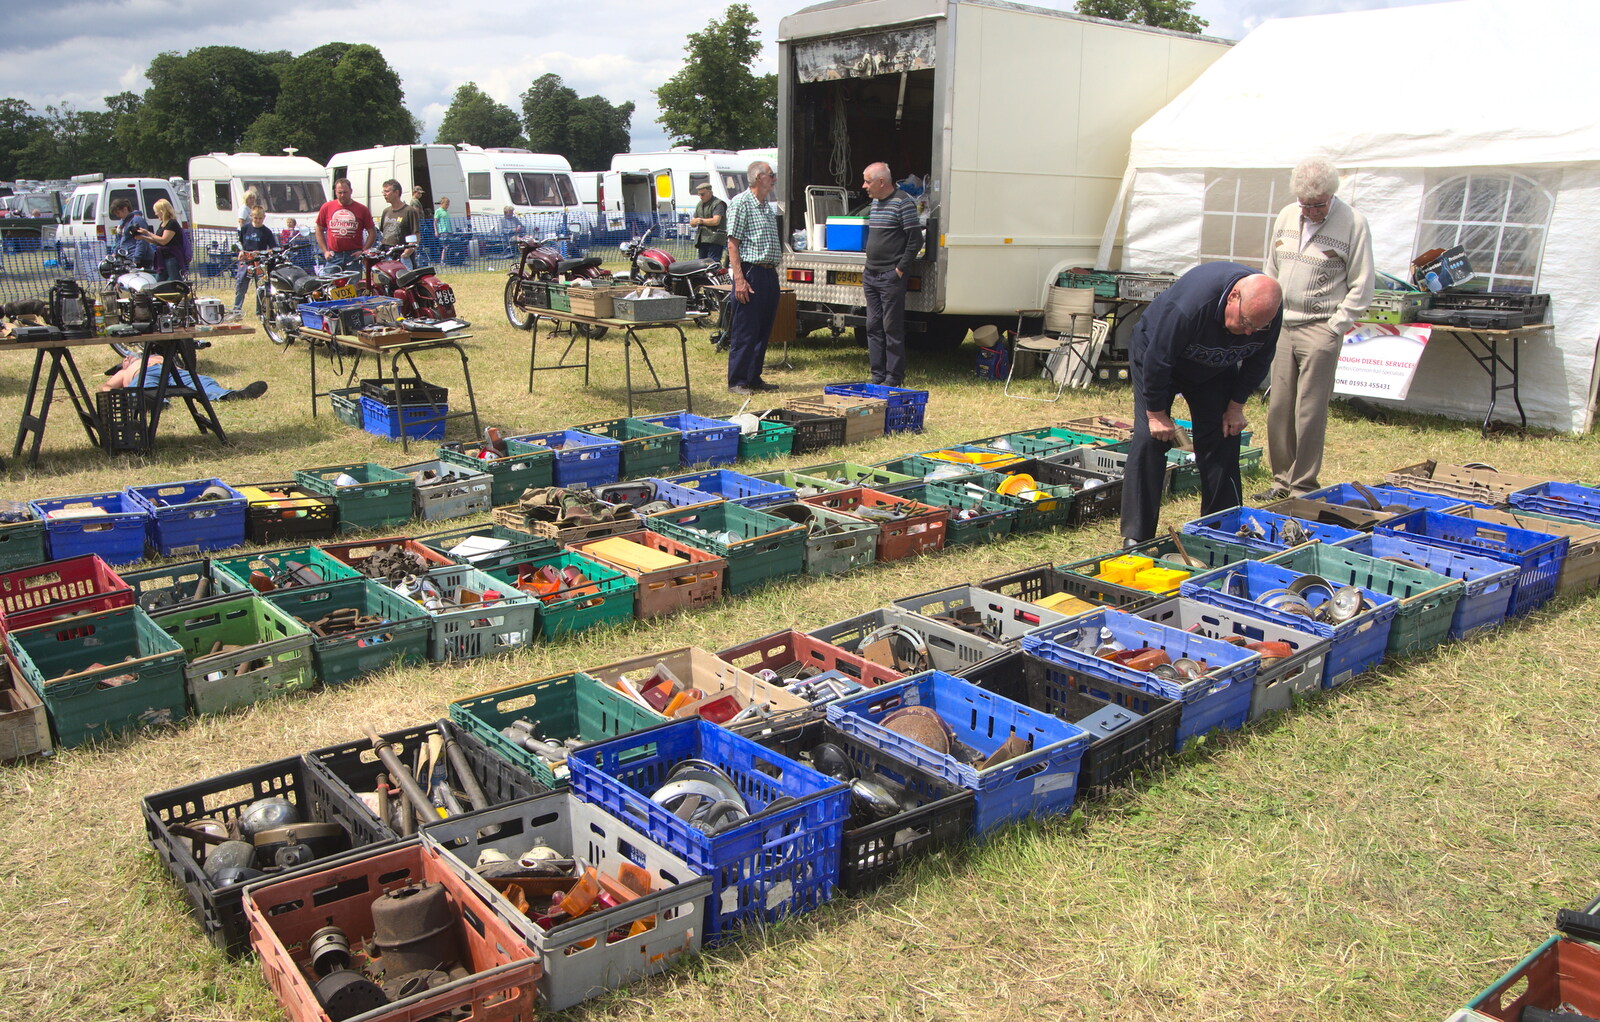 Crates and crates of bizarre random guff from A Vintage Tractorey Sort of Day, Palgrave, Suffolk - 21st June 2015